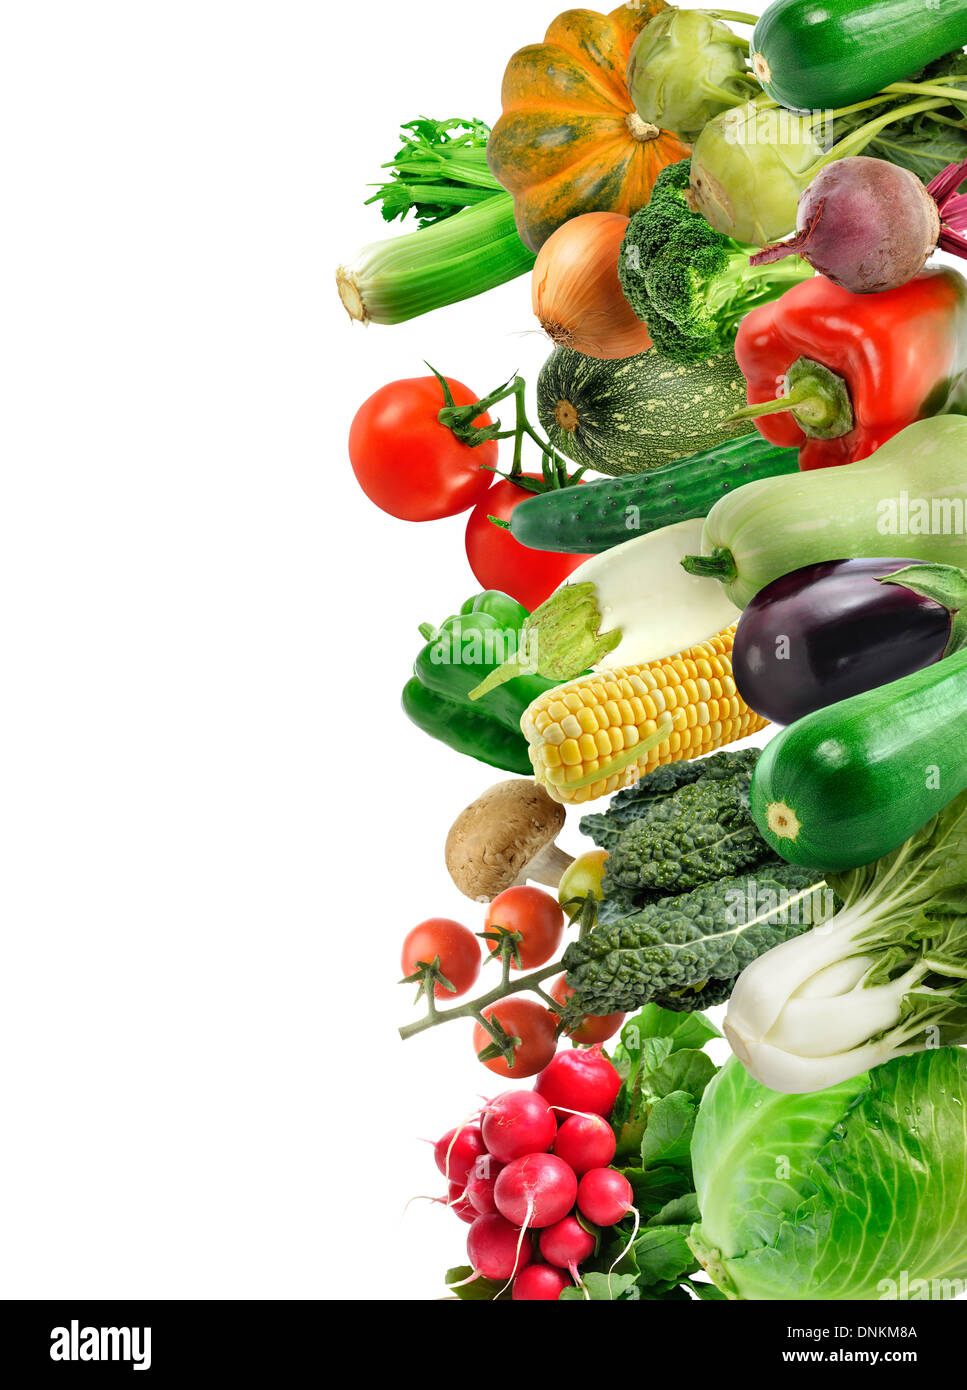 Fresh Vegetables Collection Isolated On White Stock Photo